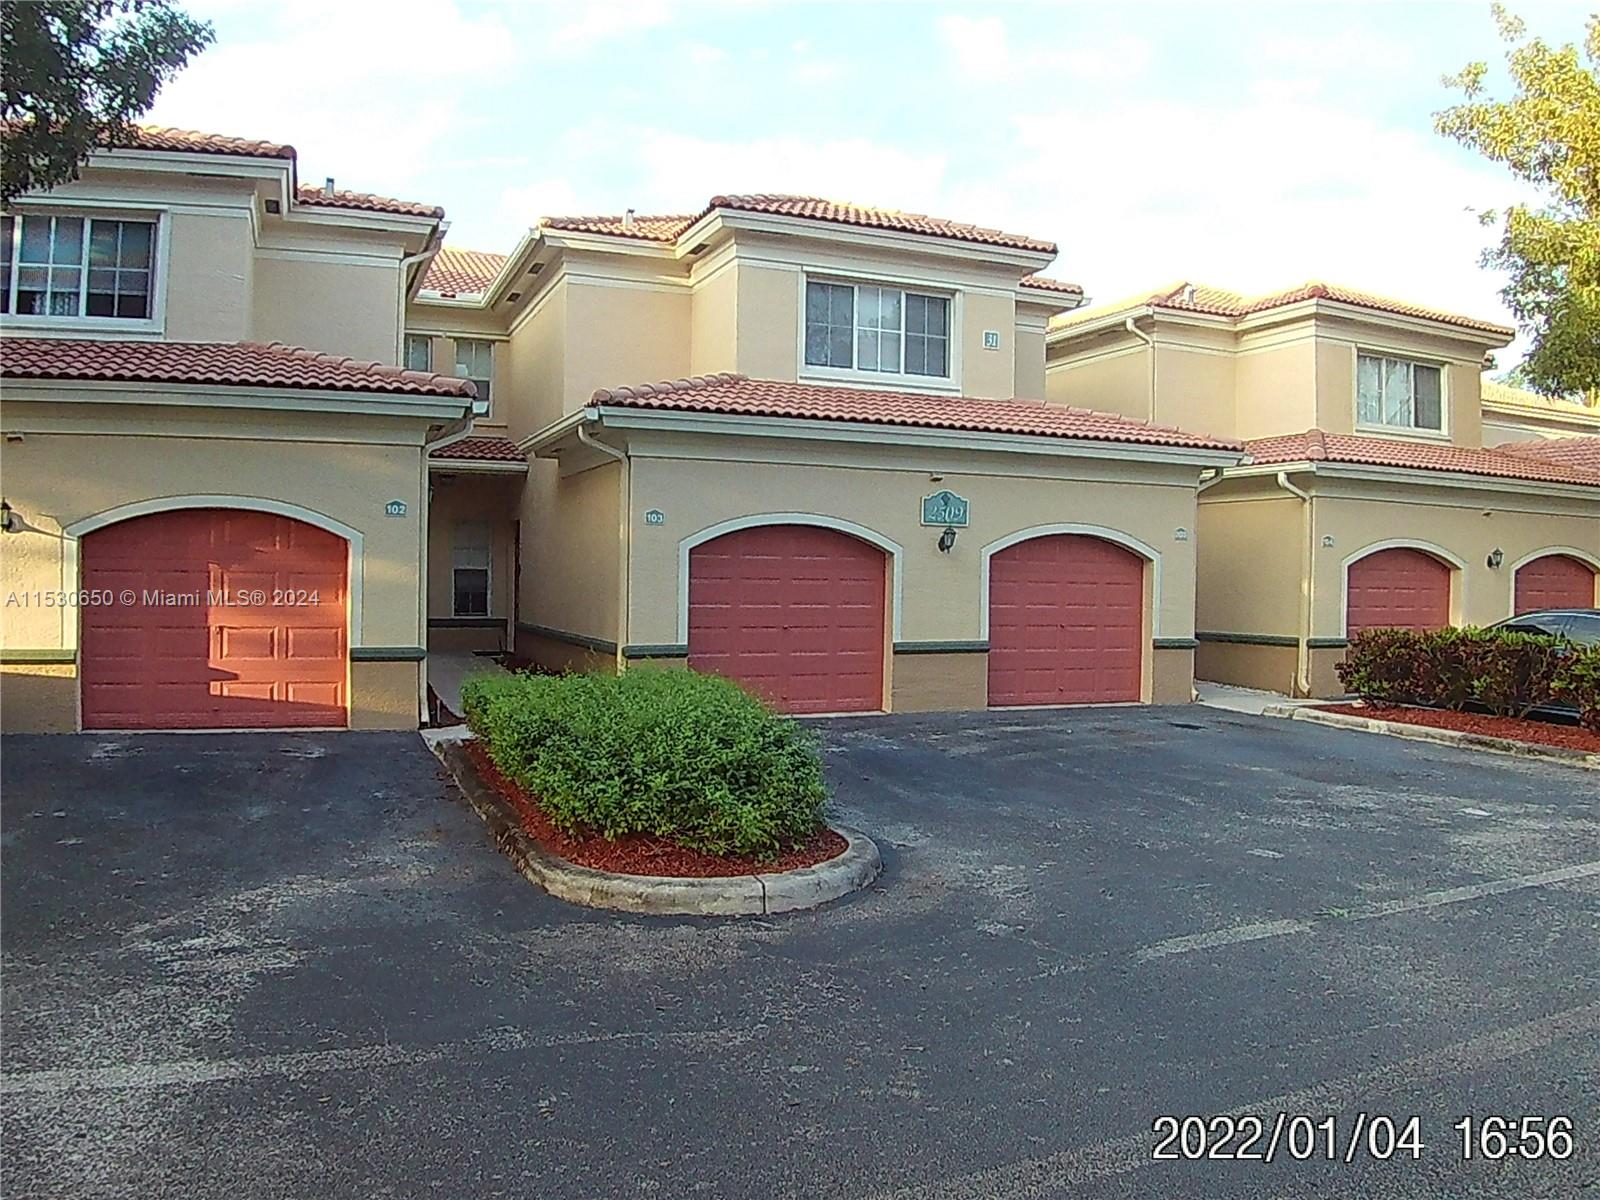 2509 Centergate Dr 103, Miramar, Florida 33025, 1 Bedroom Bedrooms, ,1 BathroomBathrooms,Residential,For Sale,2509 Centergate Dr 103,A11530650